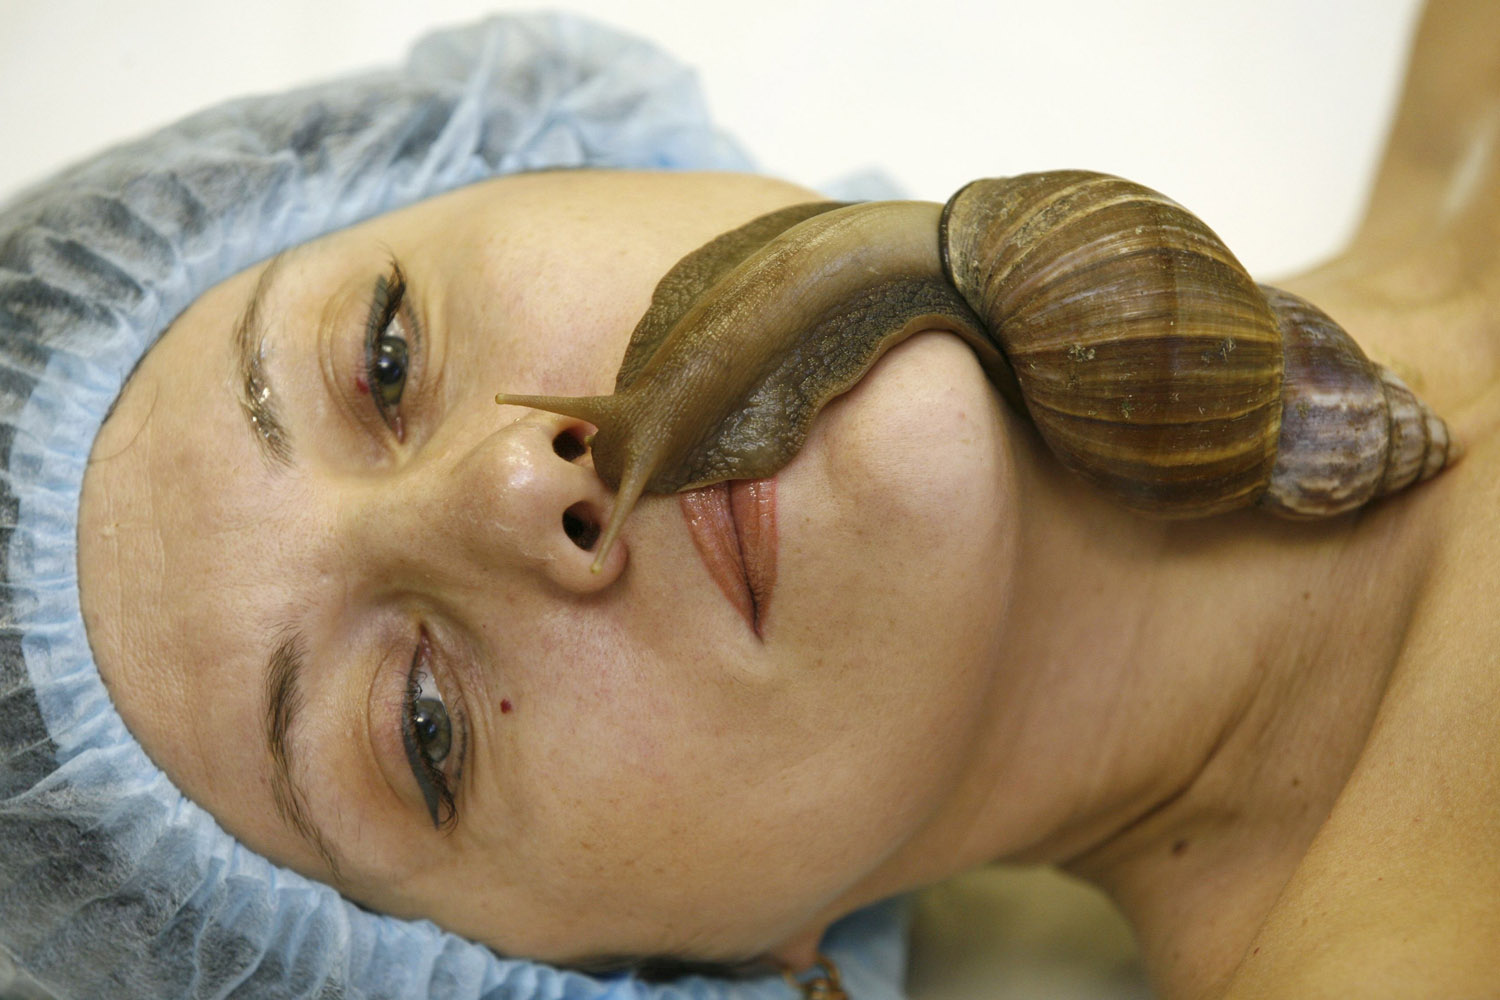 A member of the "Ranetka" private family club takes a medical-cosmetic massage using the Achatina fulica snail, in Krasnoyarsk